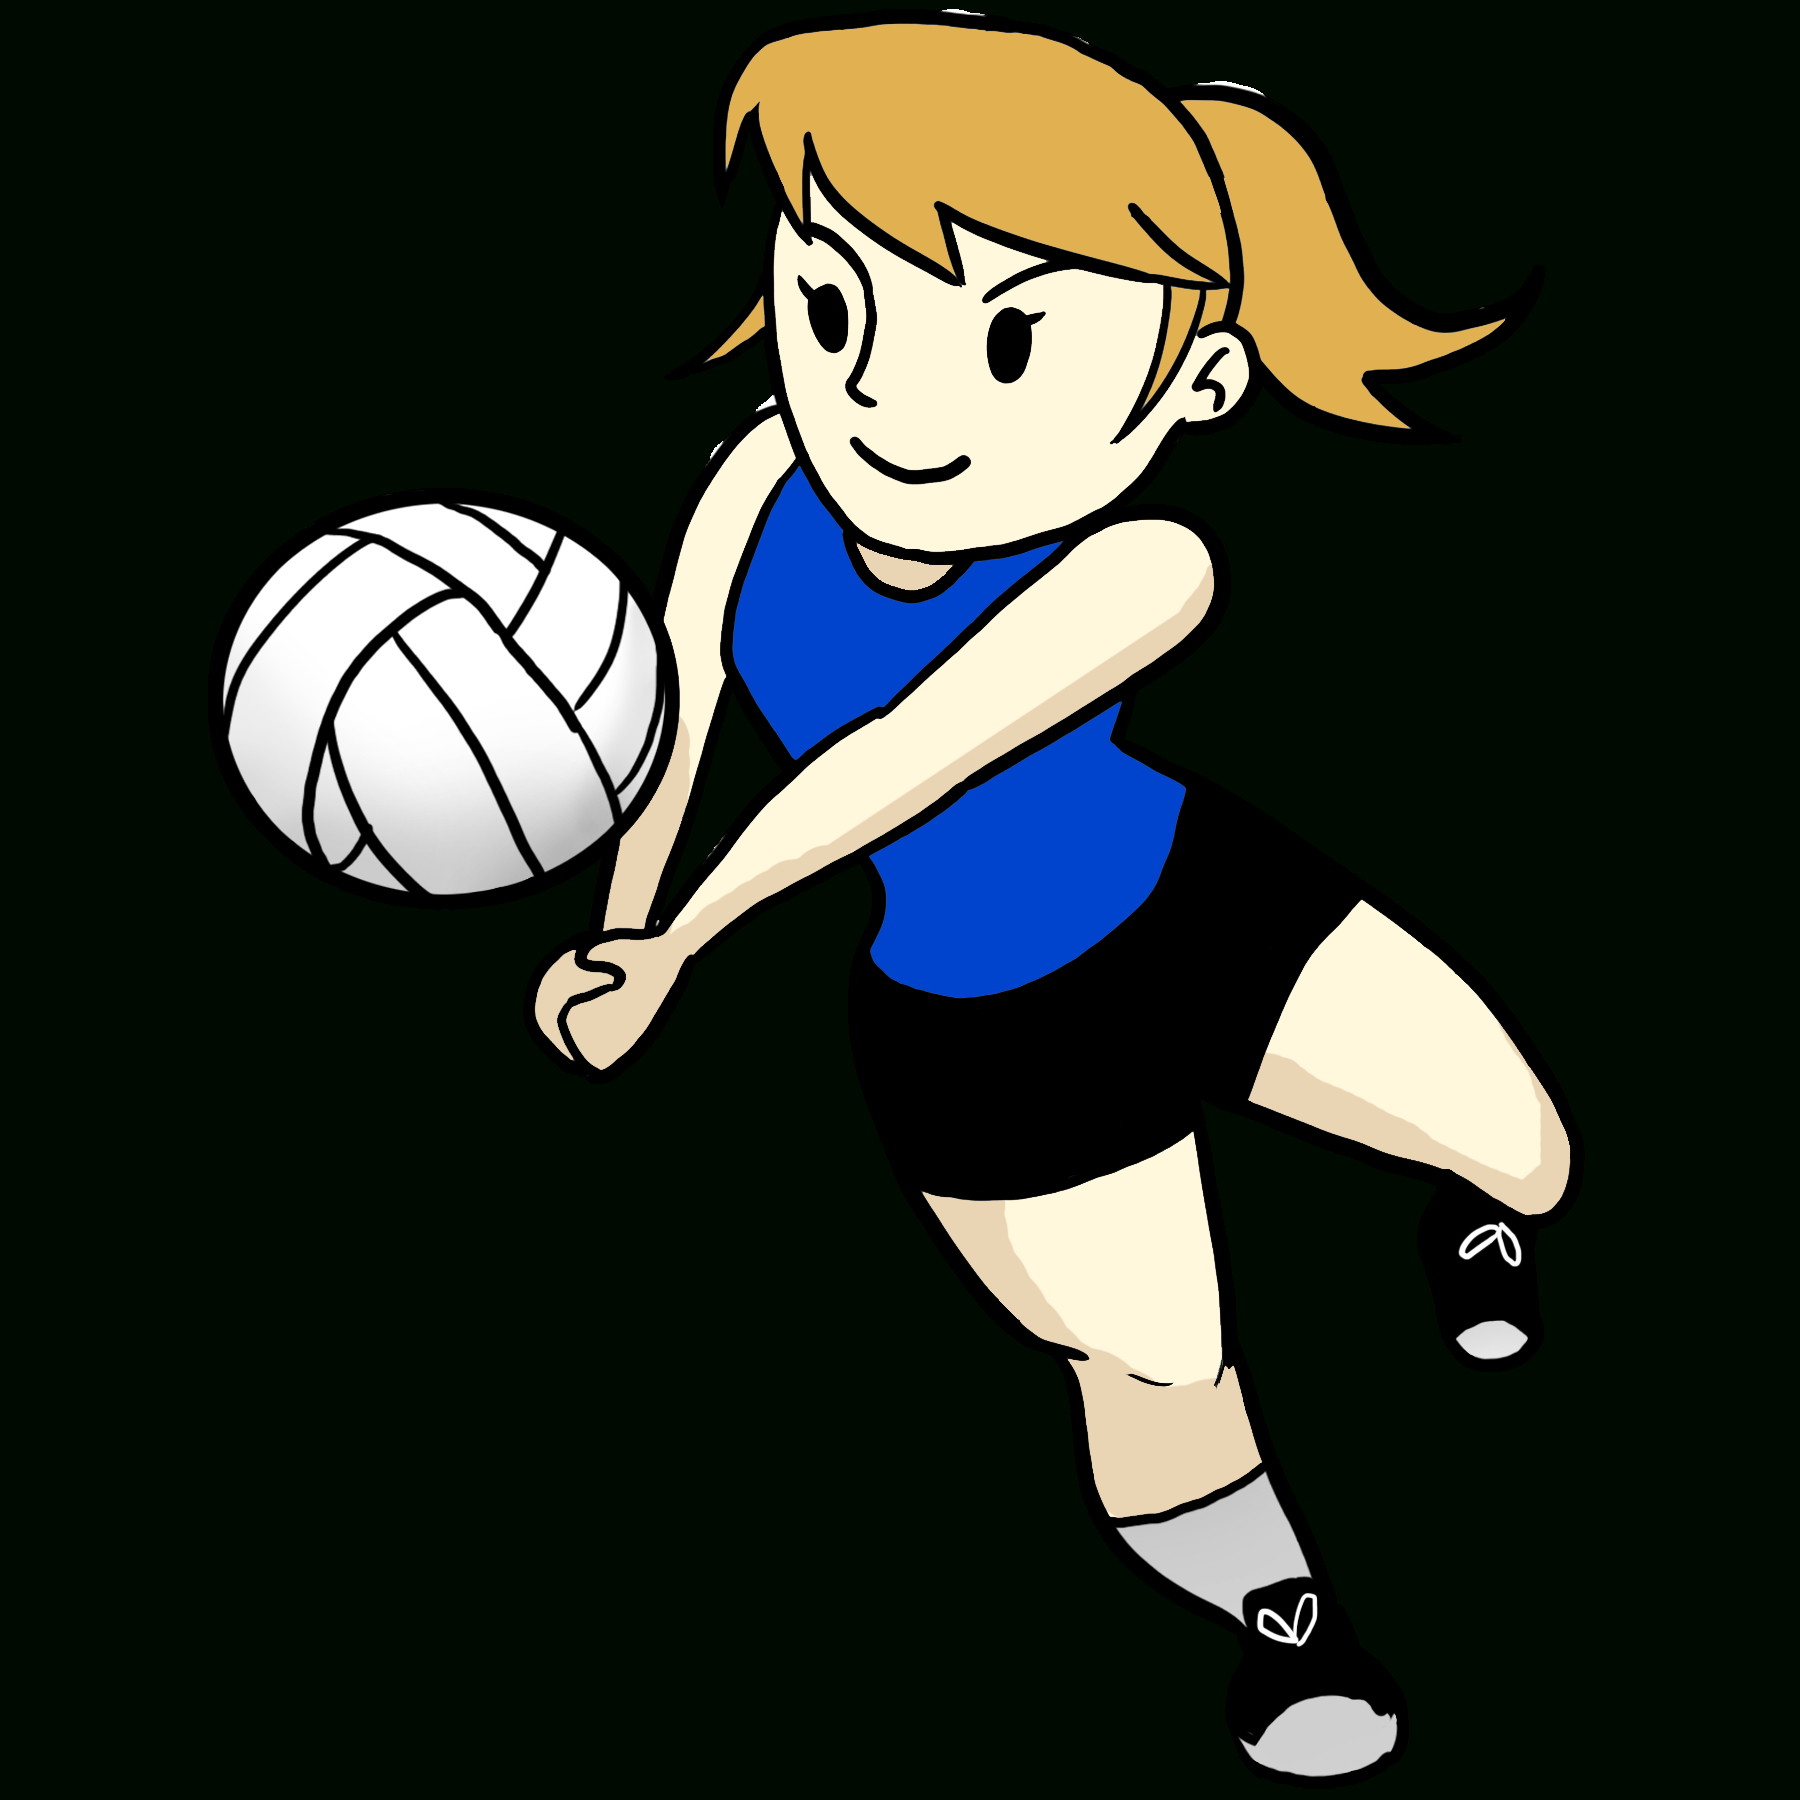 Volleyball Cartoon  Free Download Clip Art  Free Clip pour Dessin Volley 